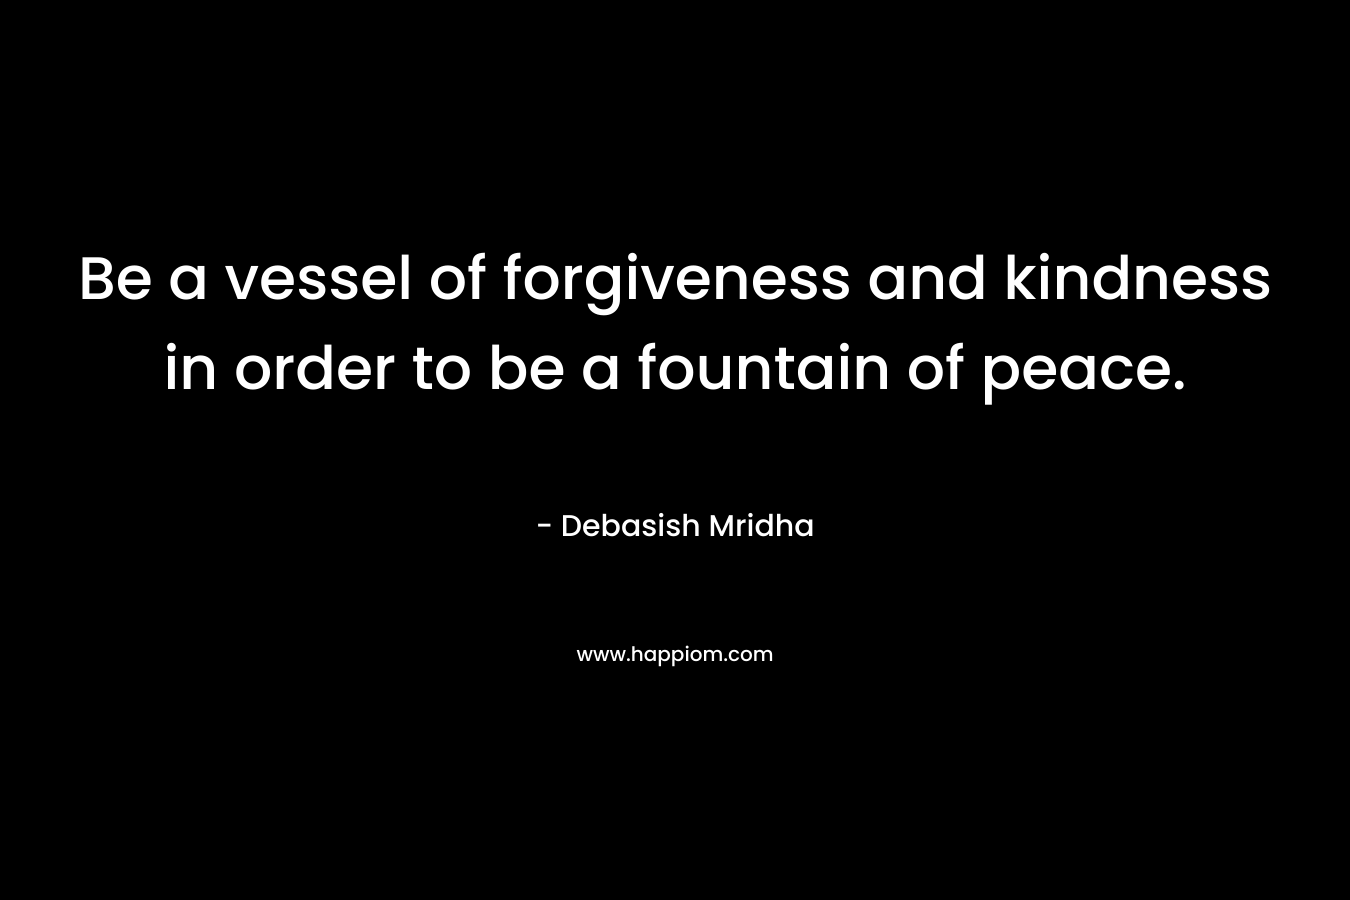 Be a vessel of forgiveness and kindness in order to be a fountain of peace.